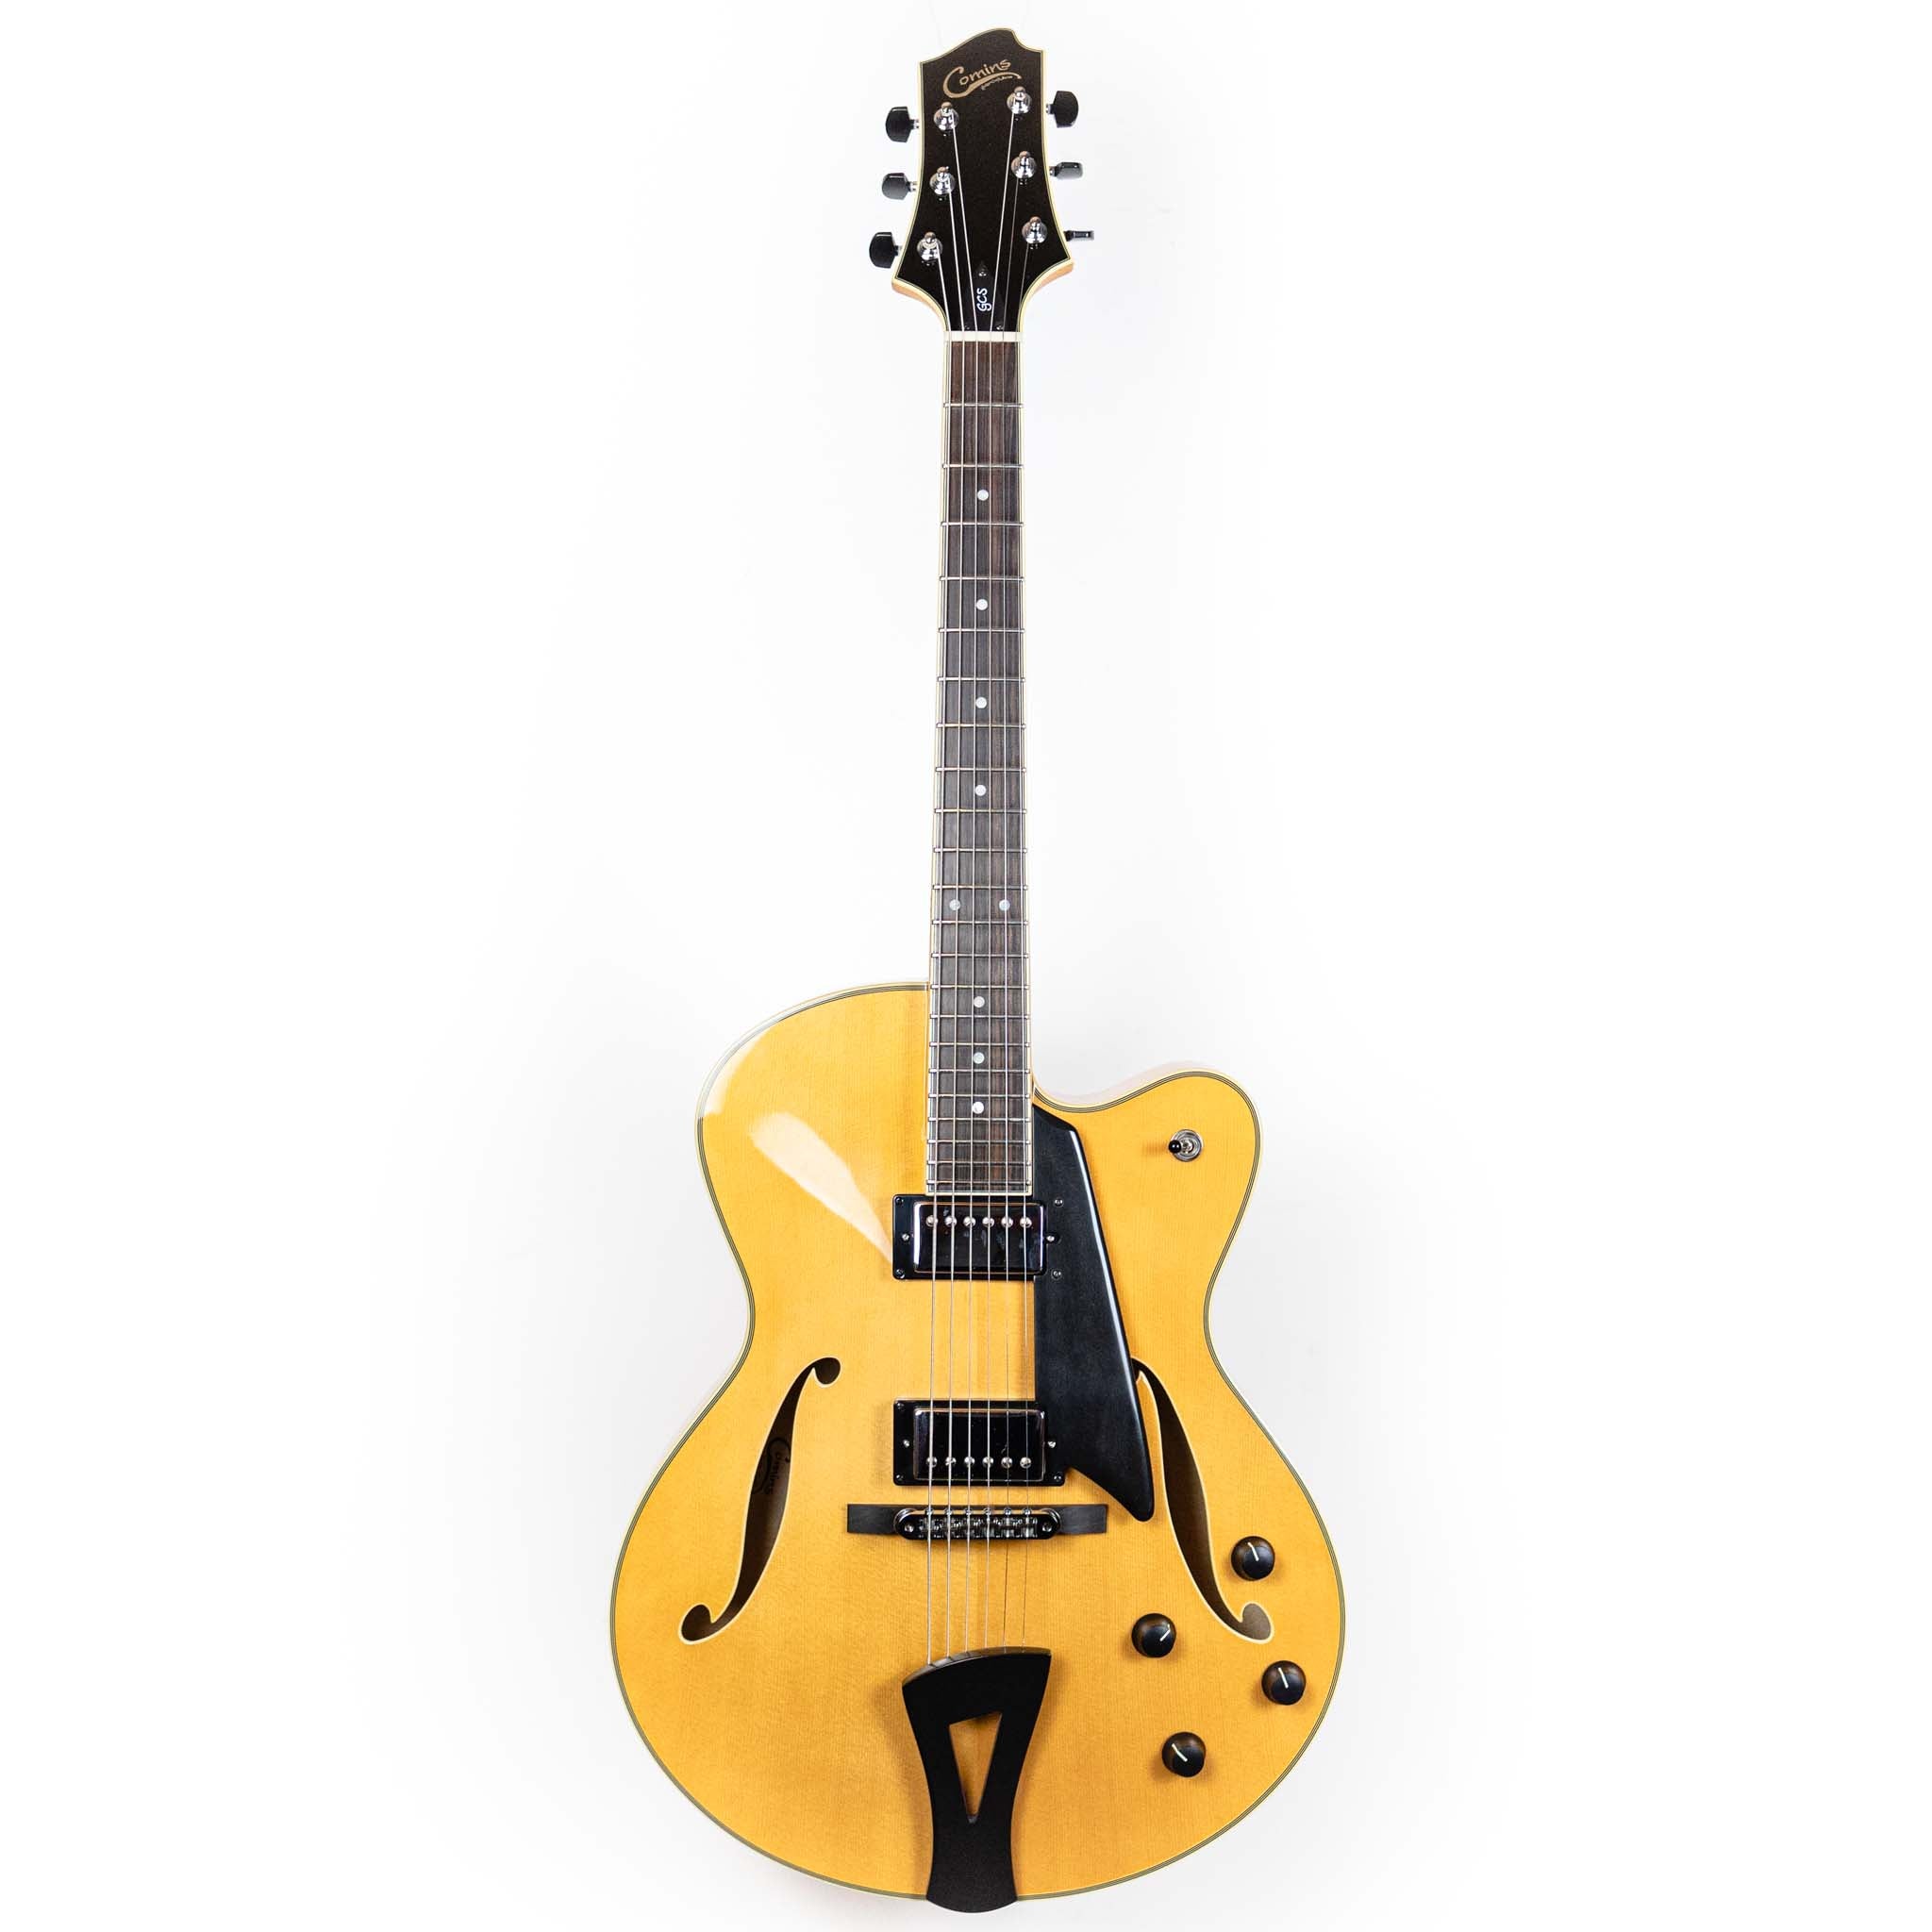 Comins GCS-16-2 Archtop in Blonde